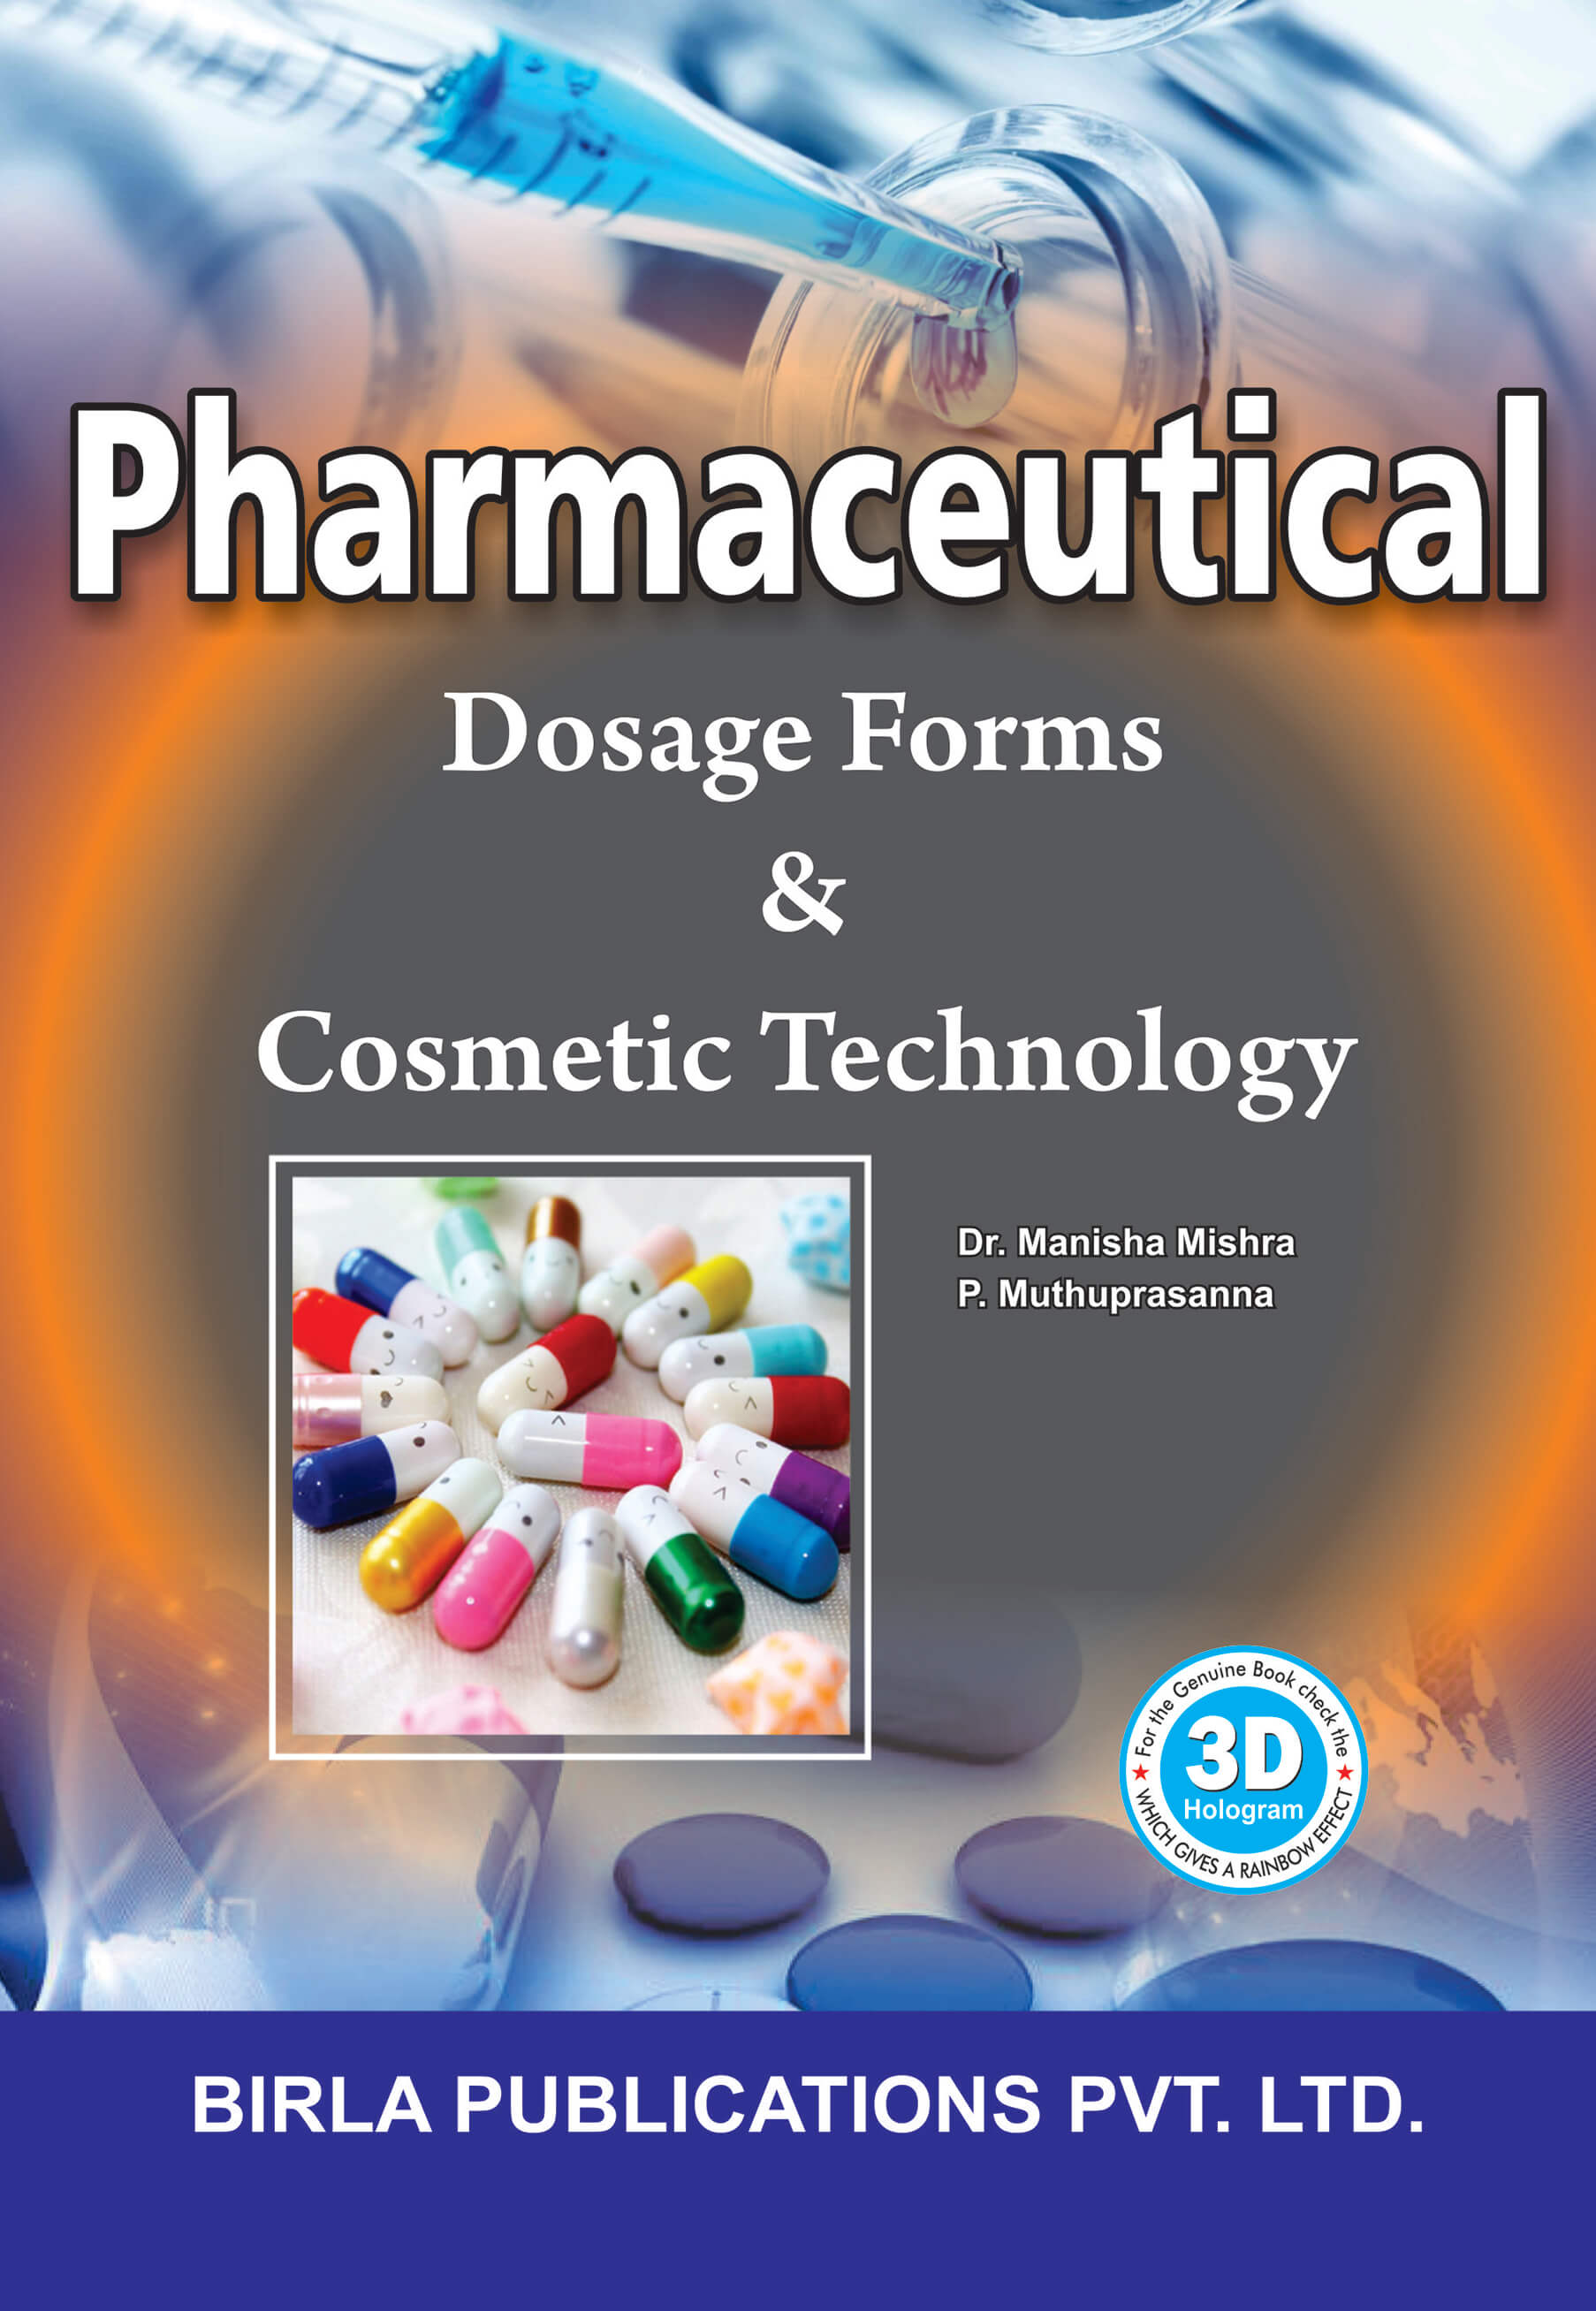 PHARMACEUTICAL DOSAGE FORM & COSMETIC TECHNOLOGY